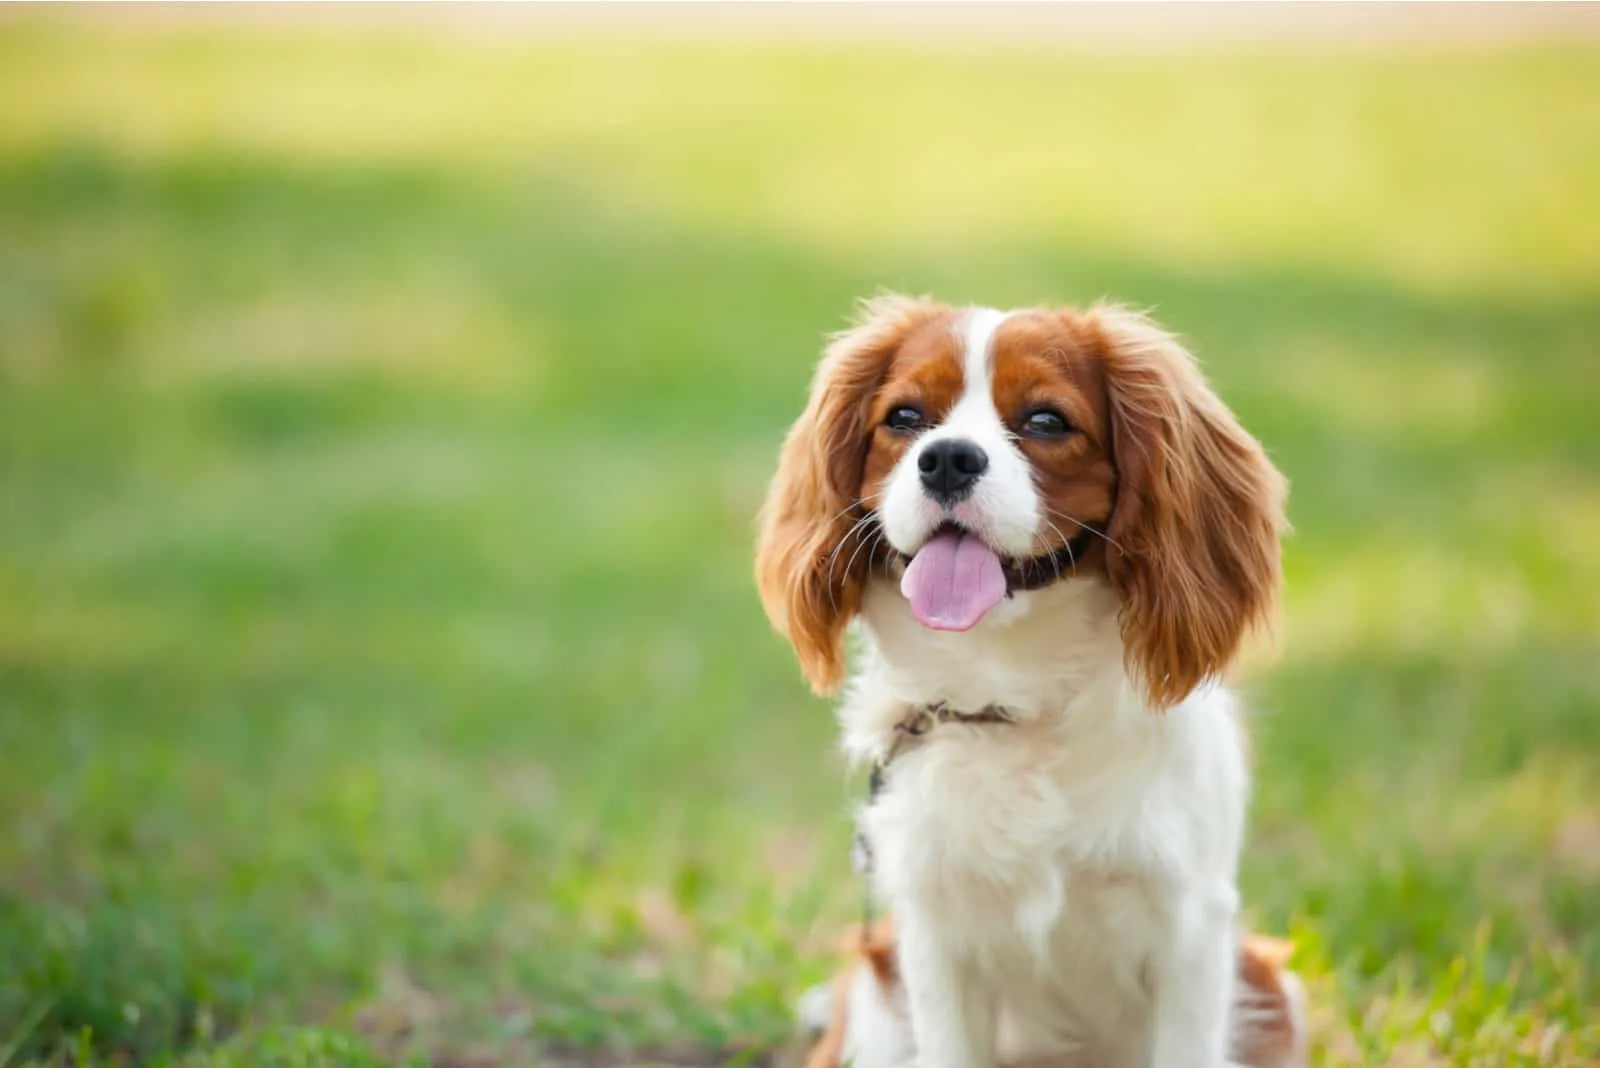 the cavalier king sits on the grass with his tongue out